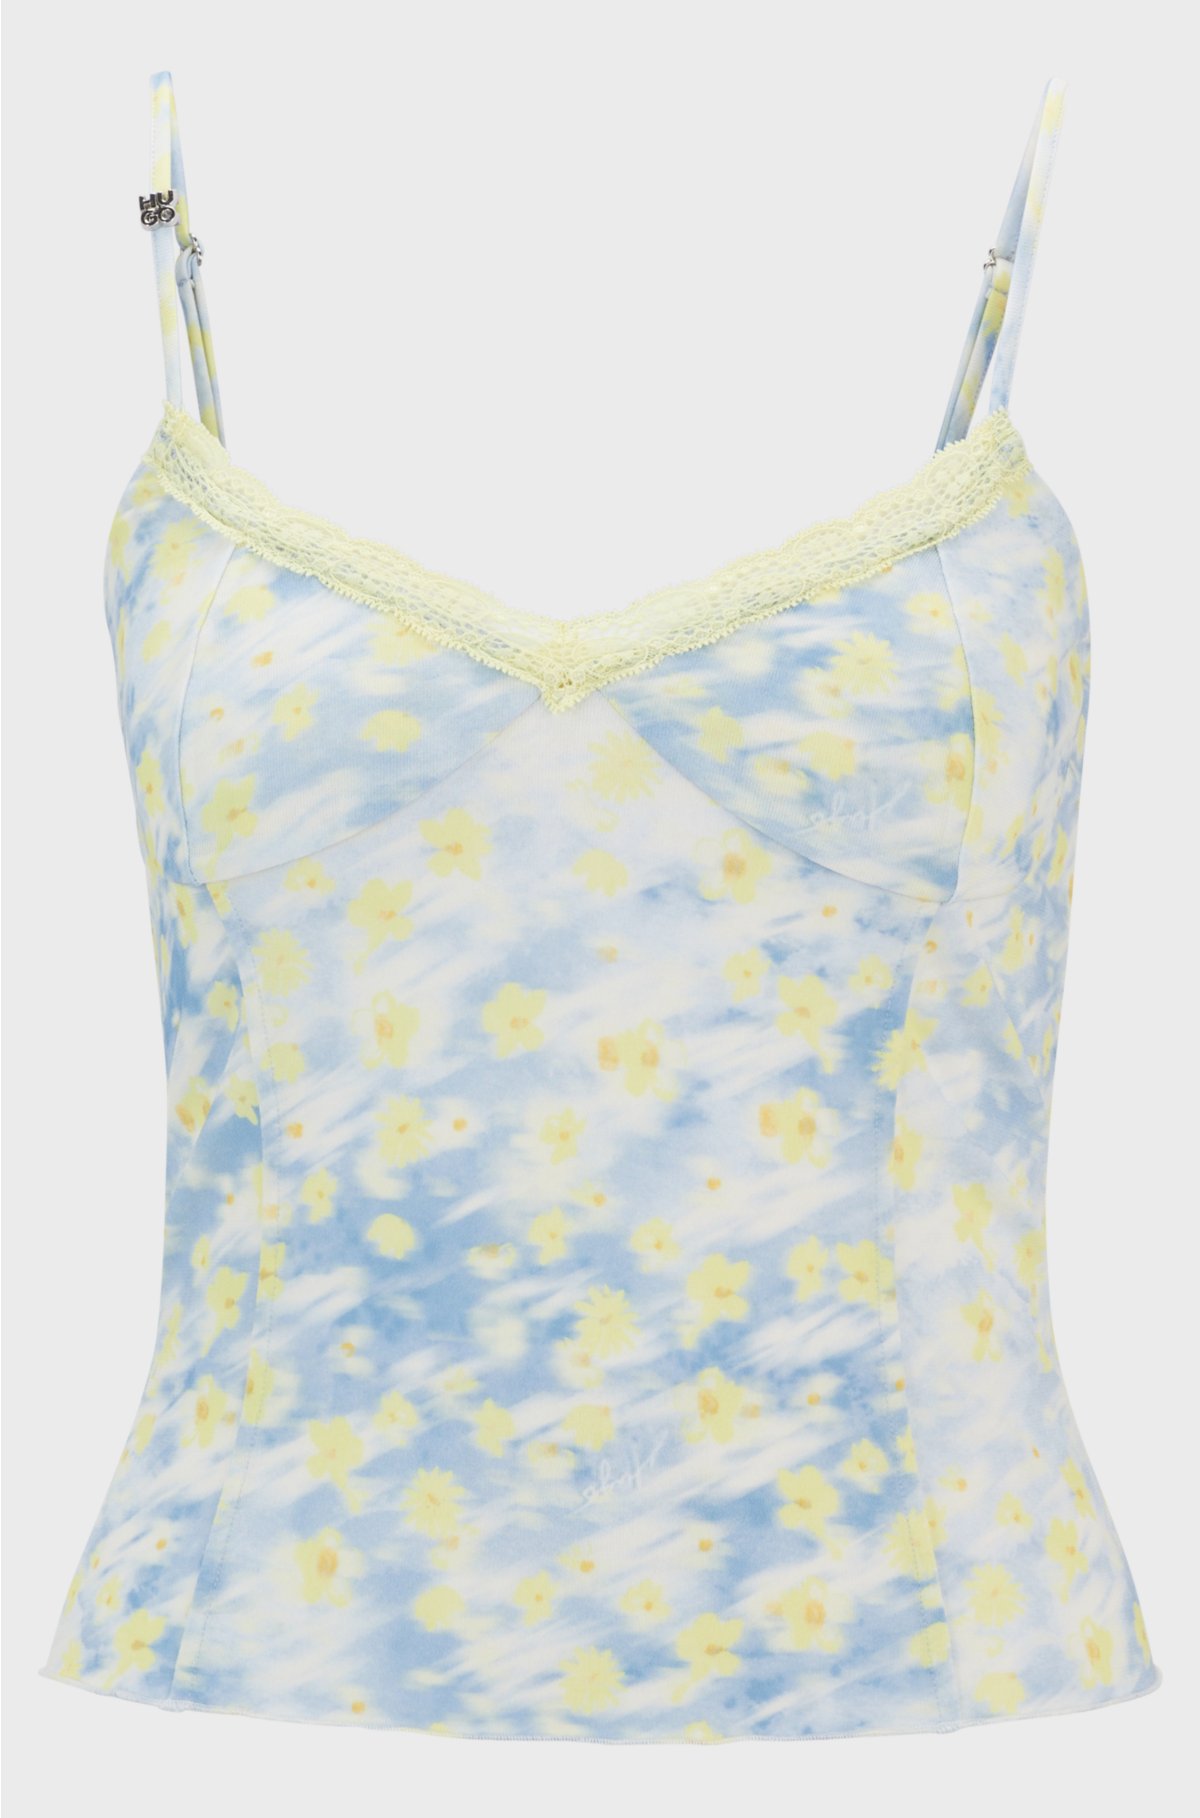 Lace-trim vest top with stacked-logo detail, Blue Patterned